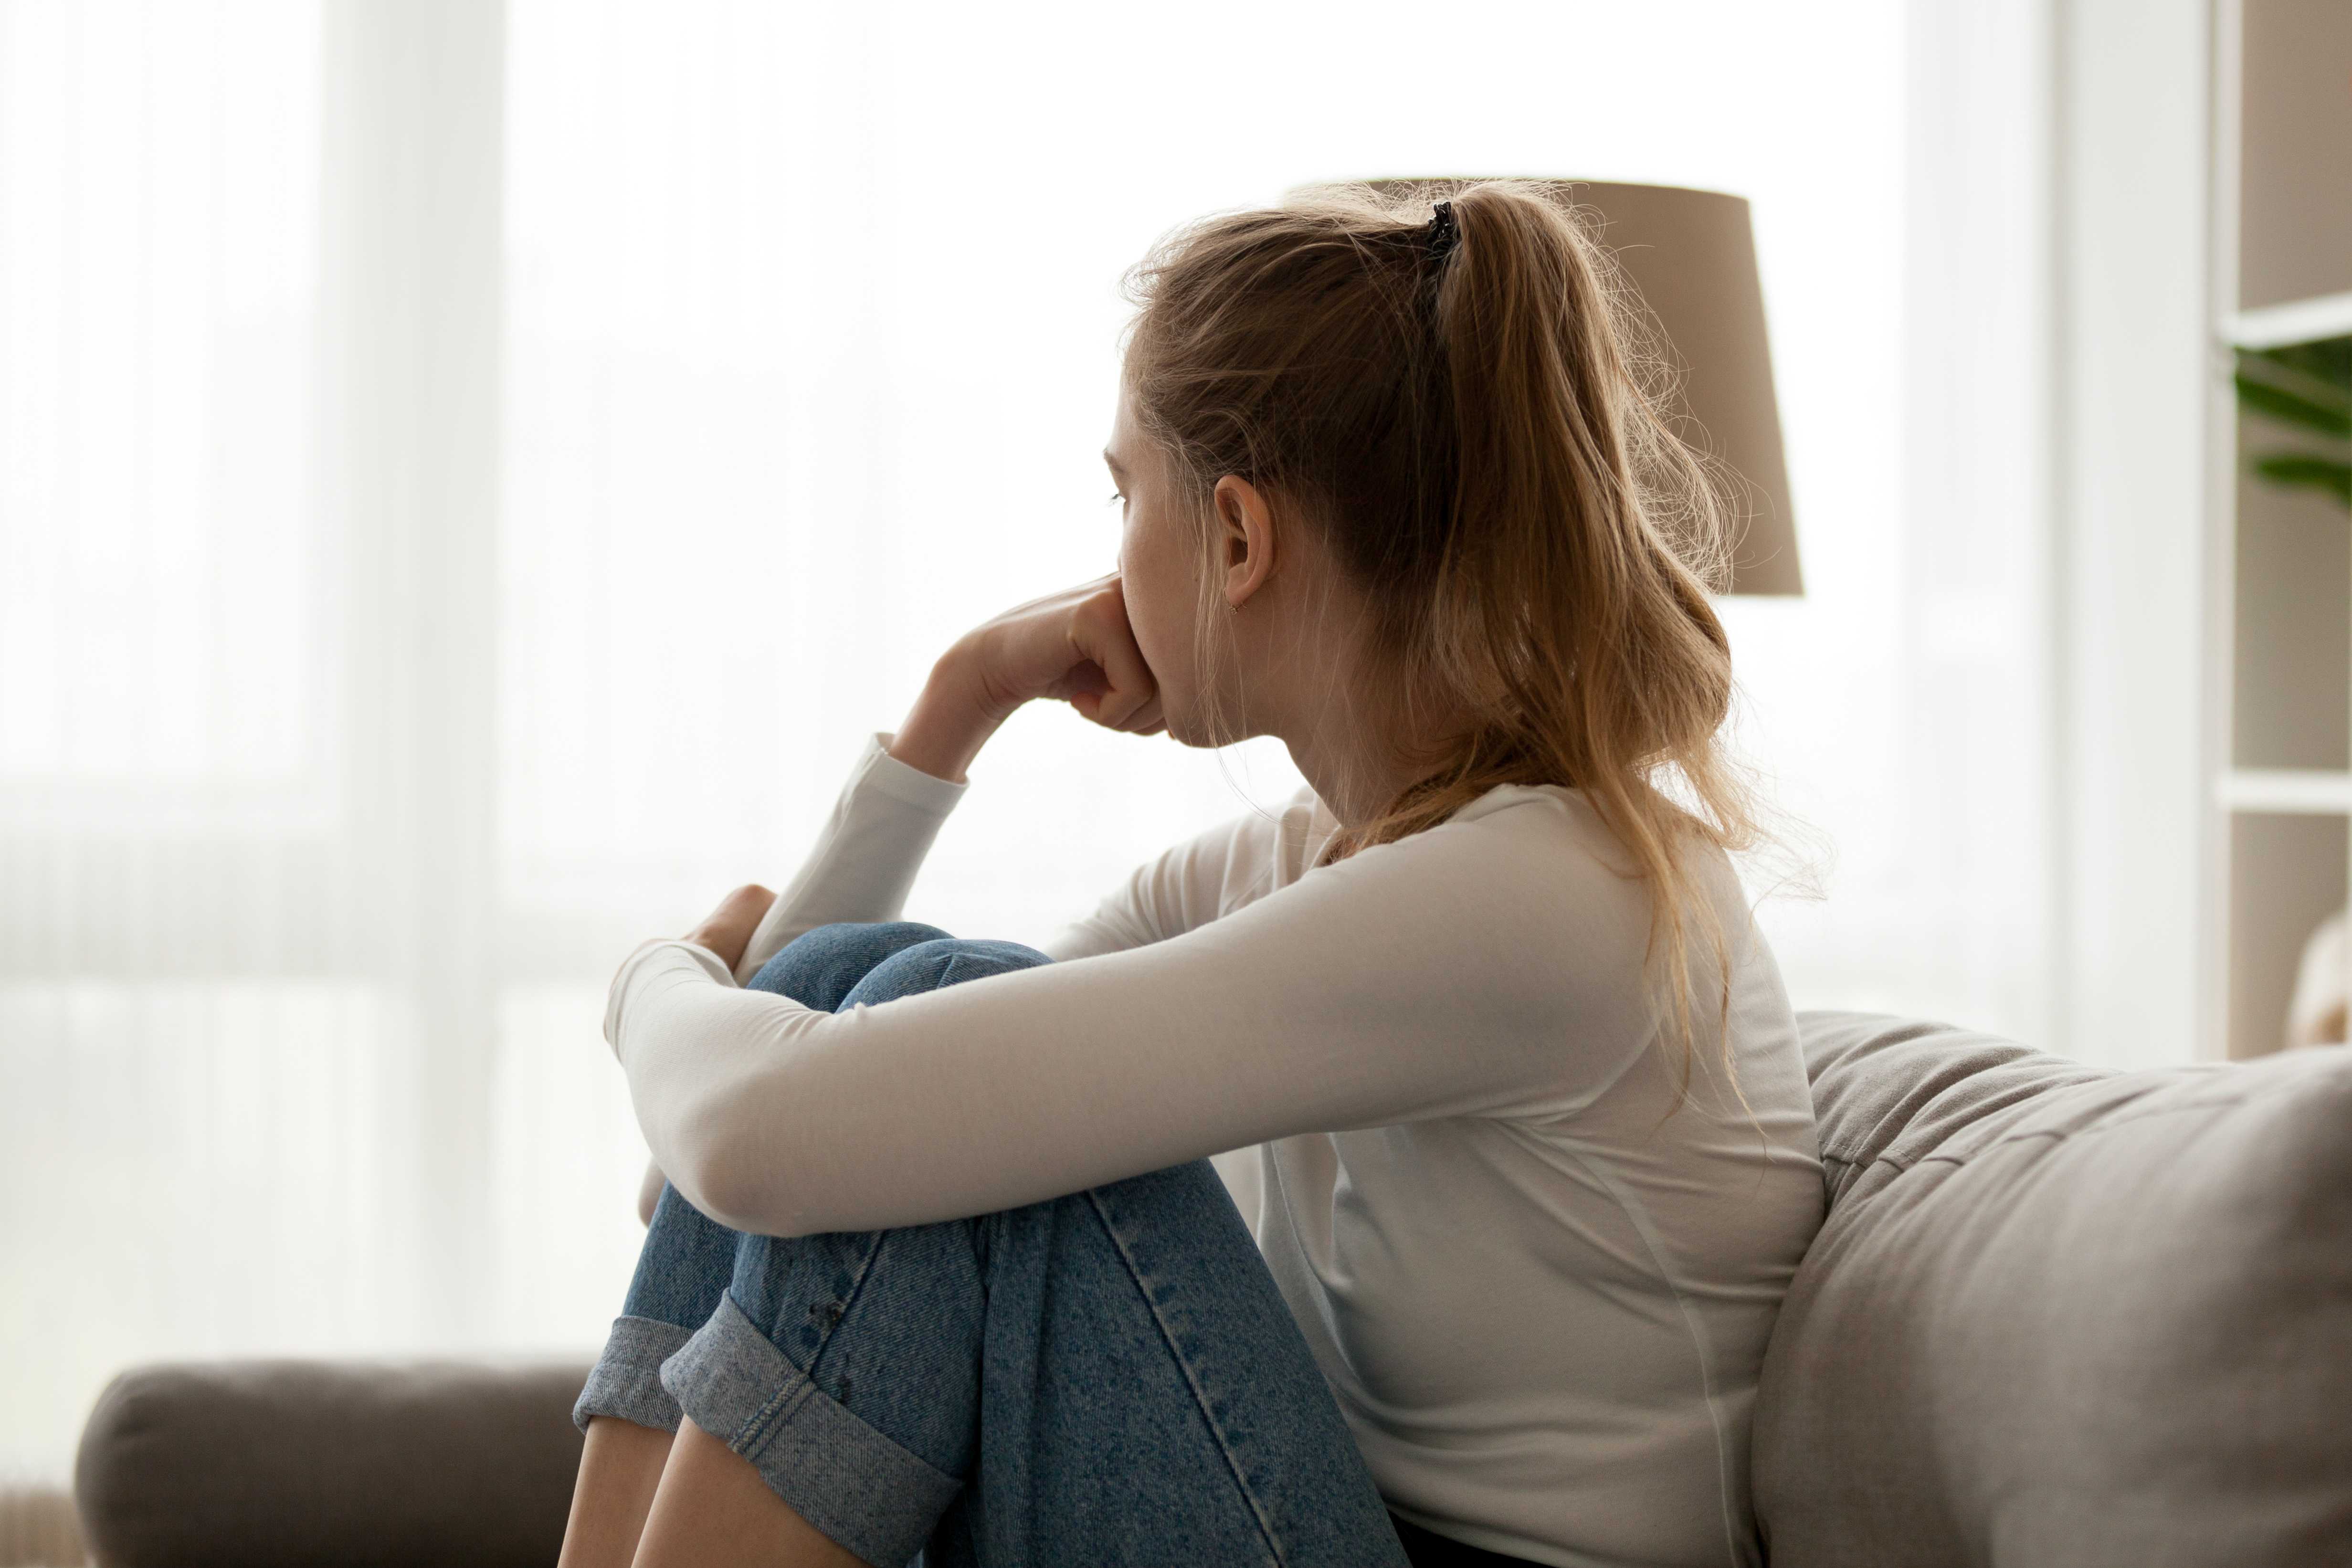 A girl sitting on a couch | Source: Shutterstock